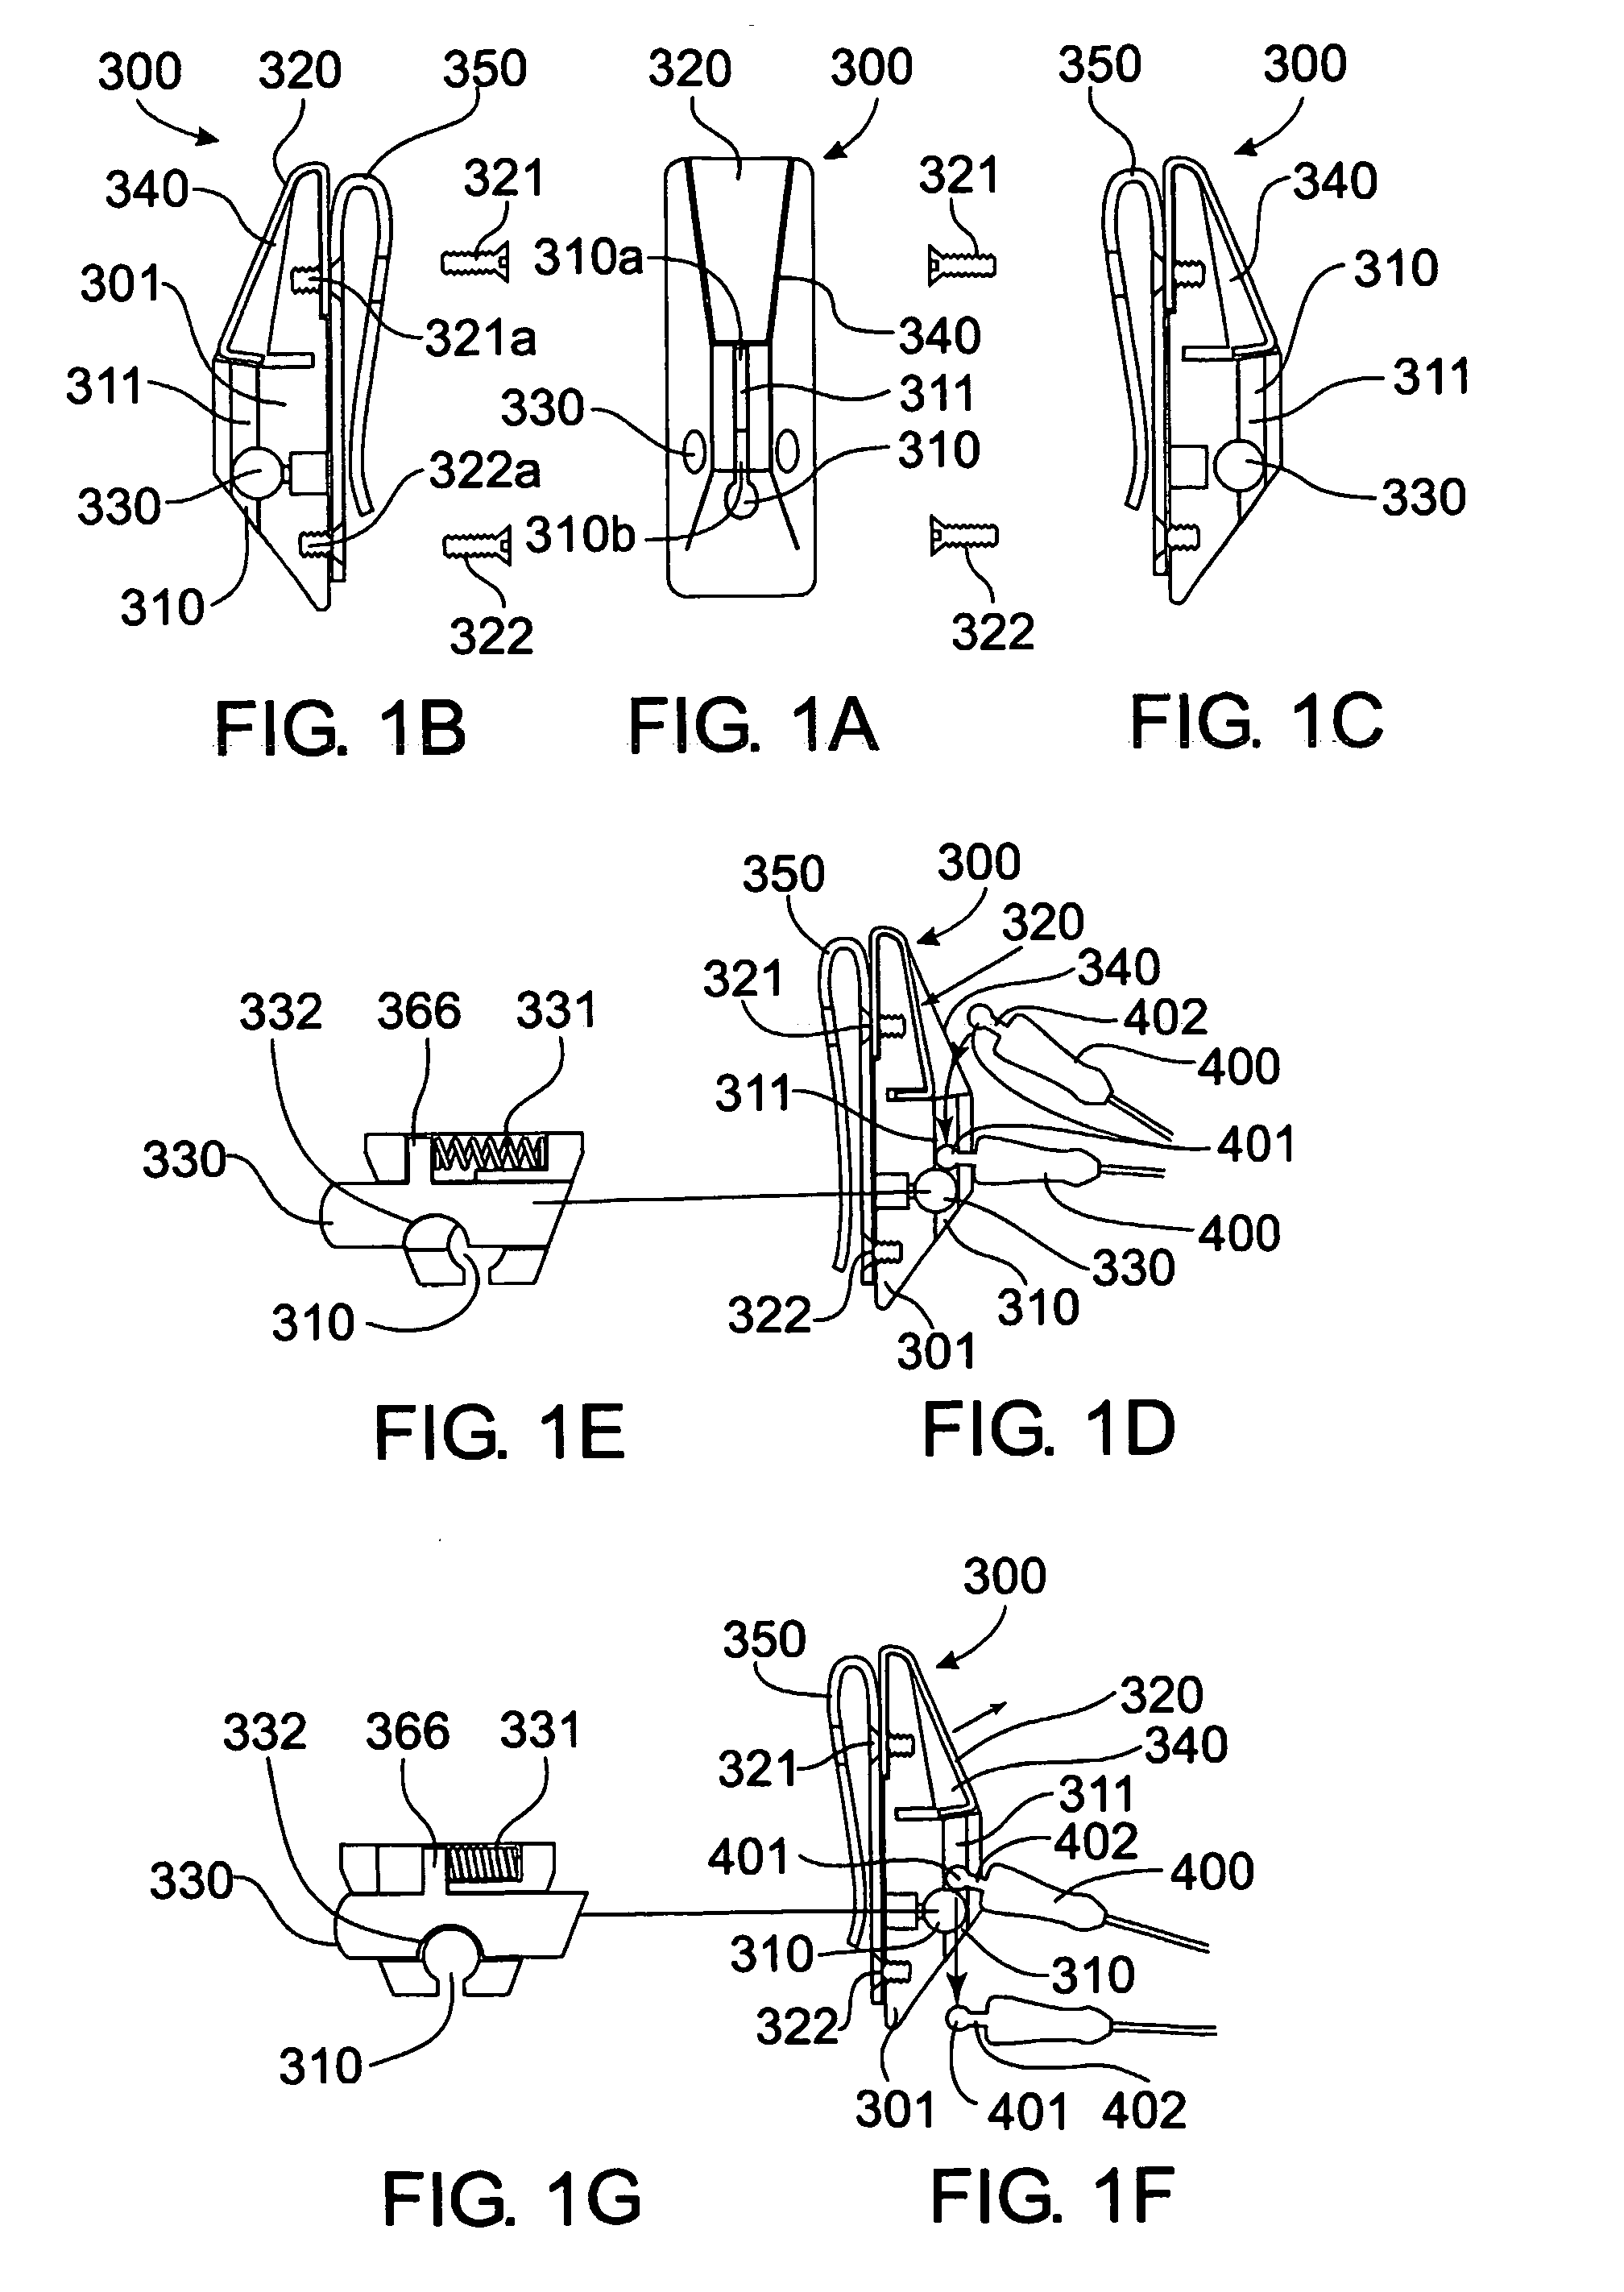 Personal device fastening system